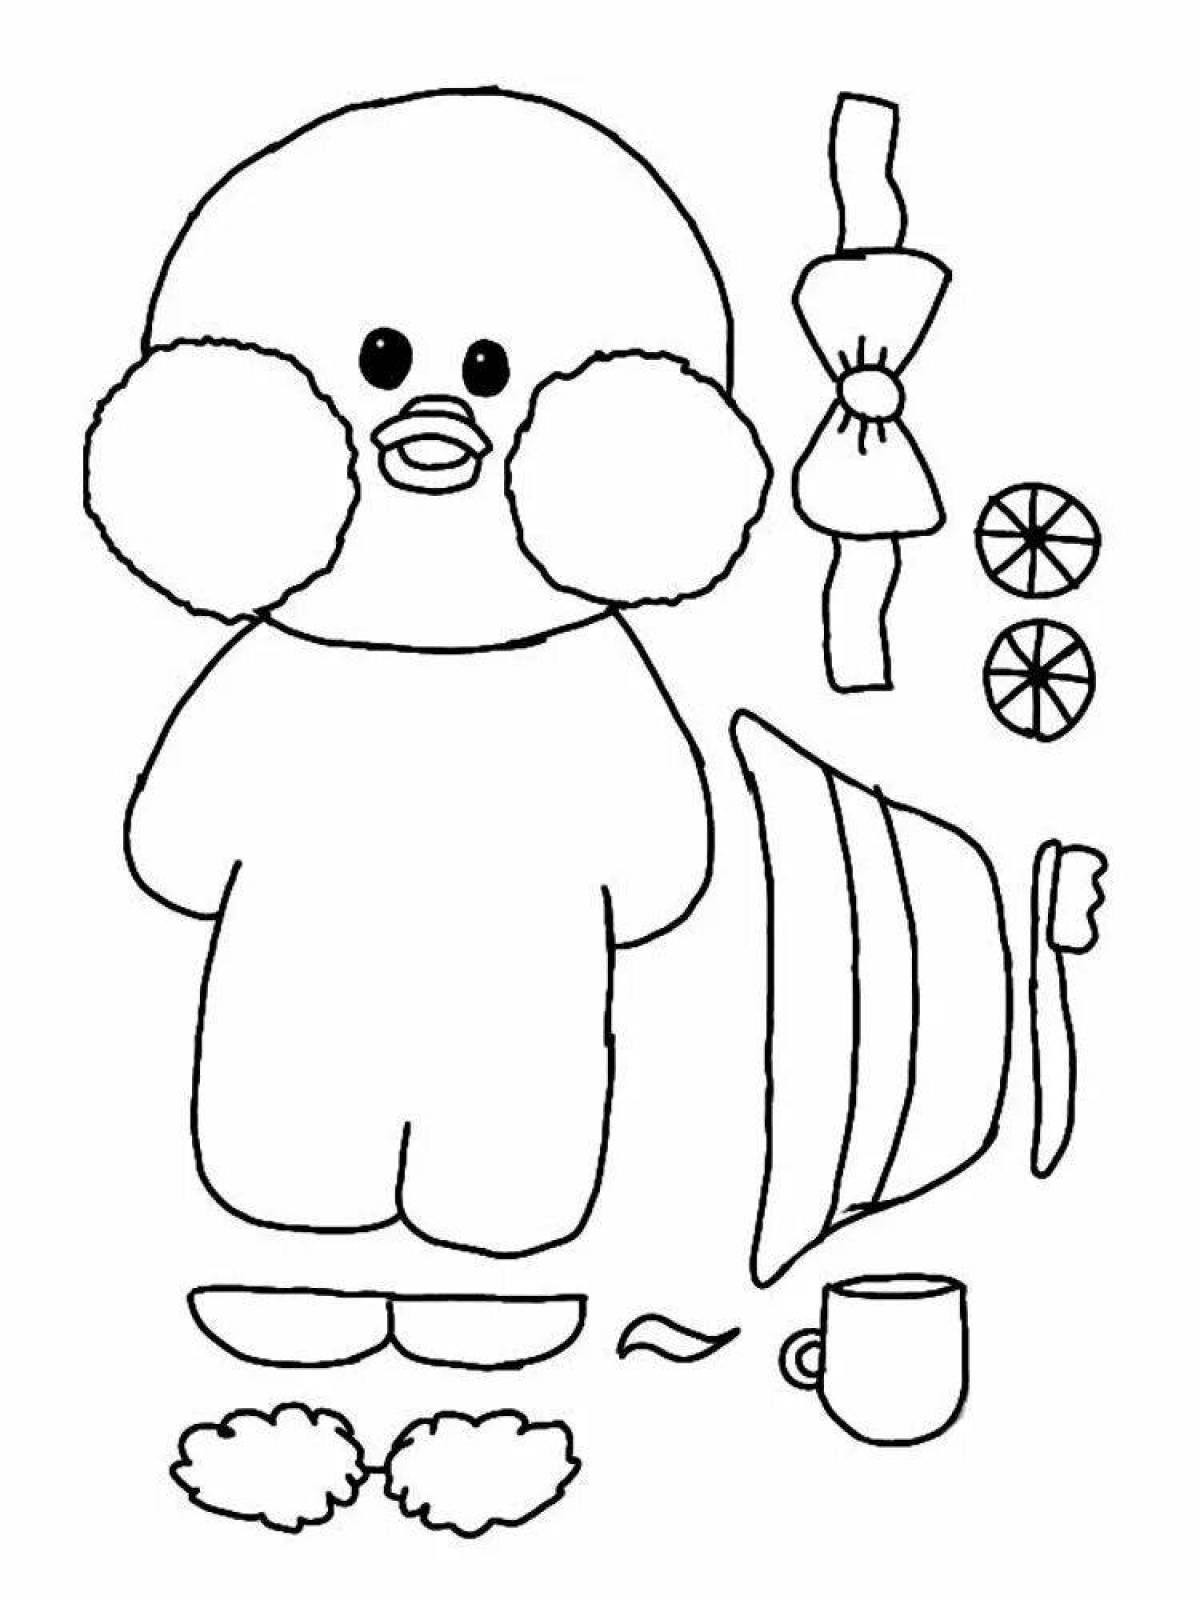 Coloring page adorable lalafanfan duck